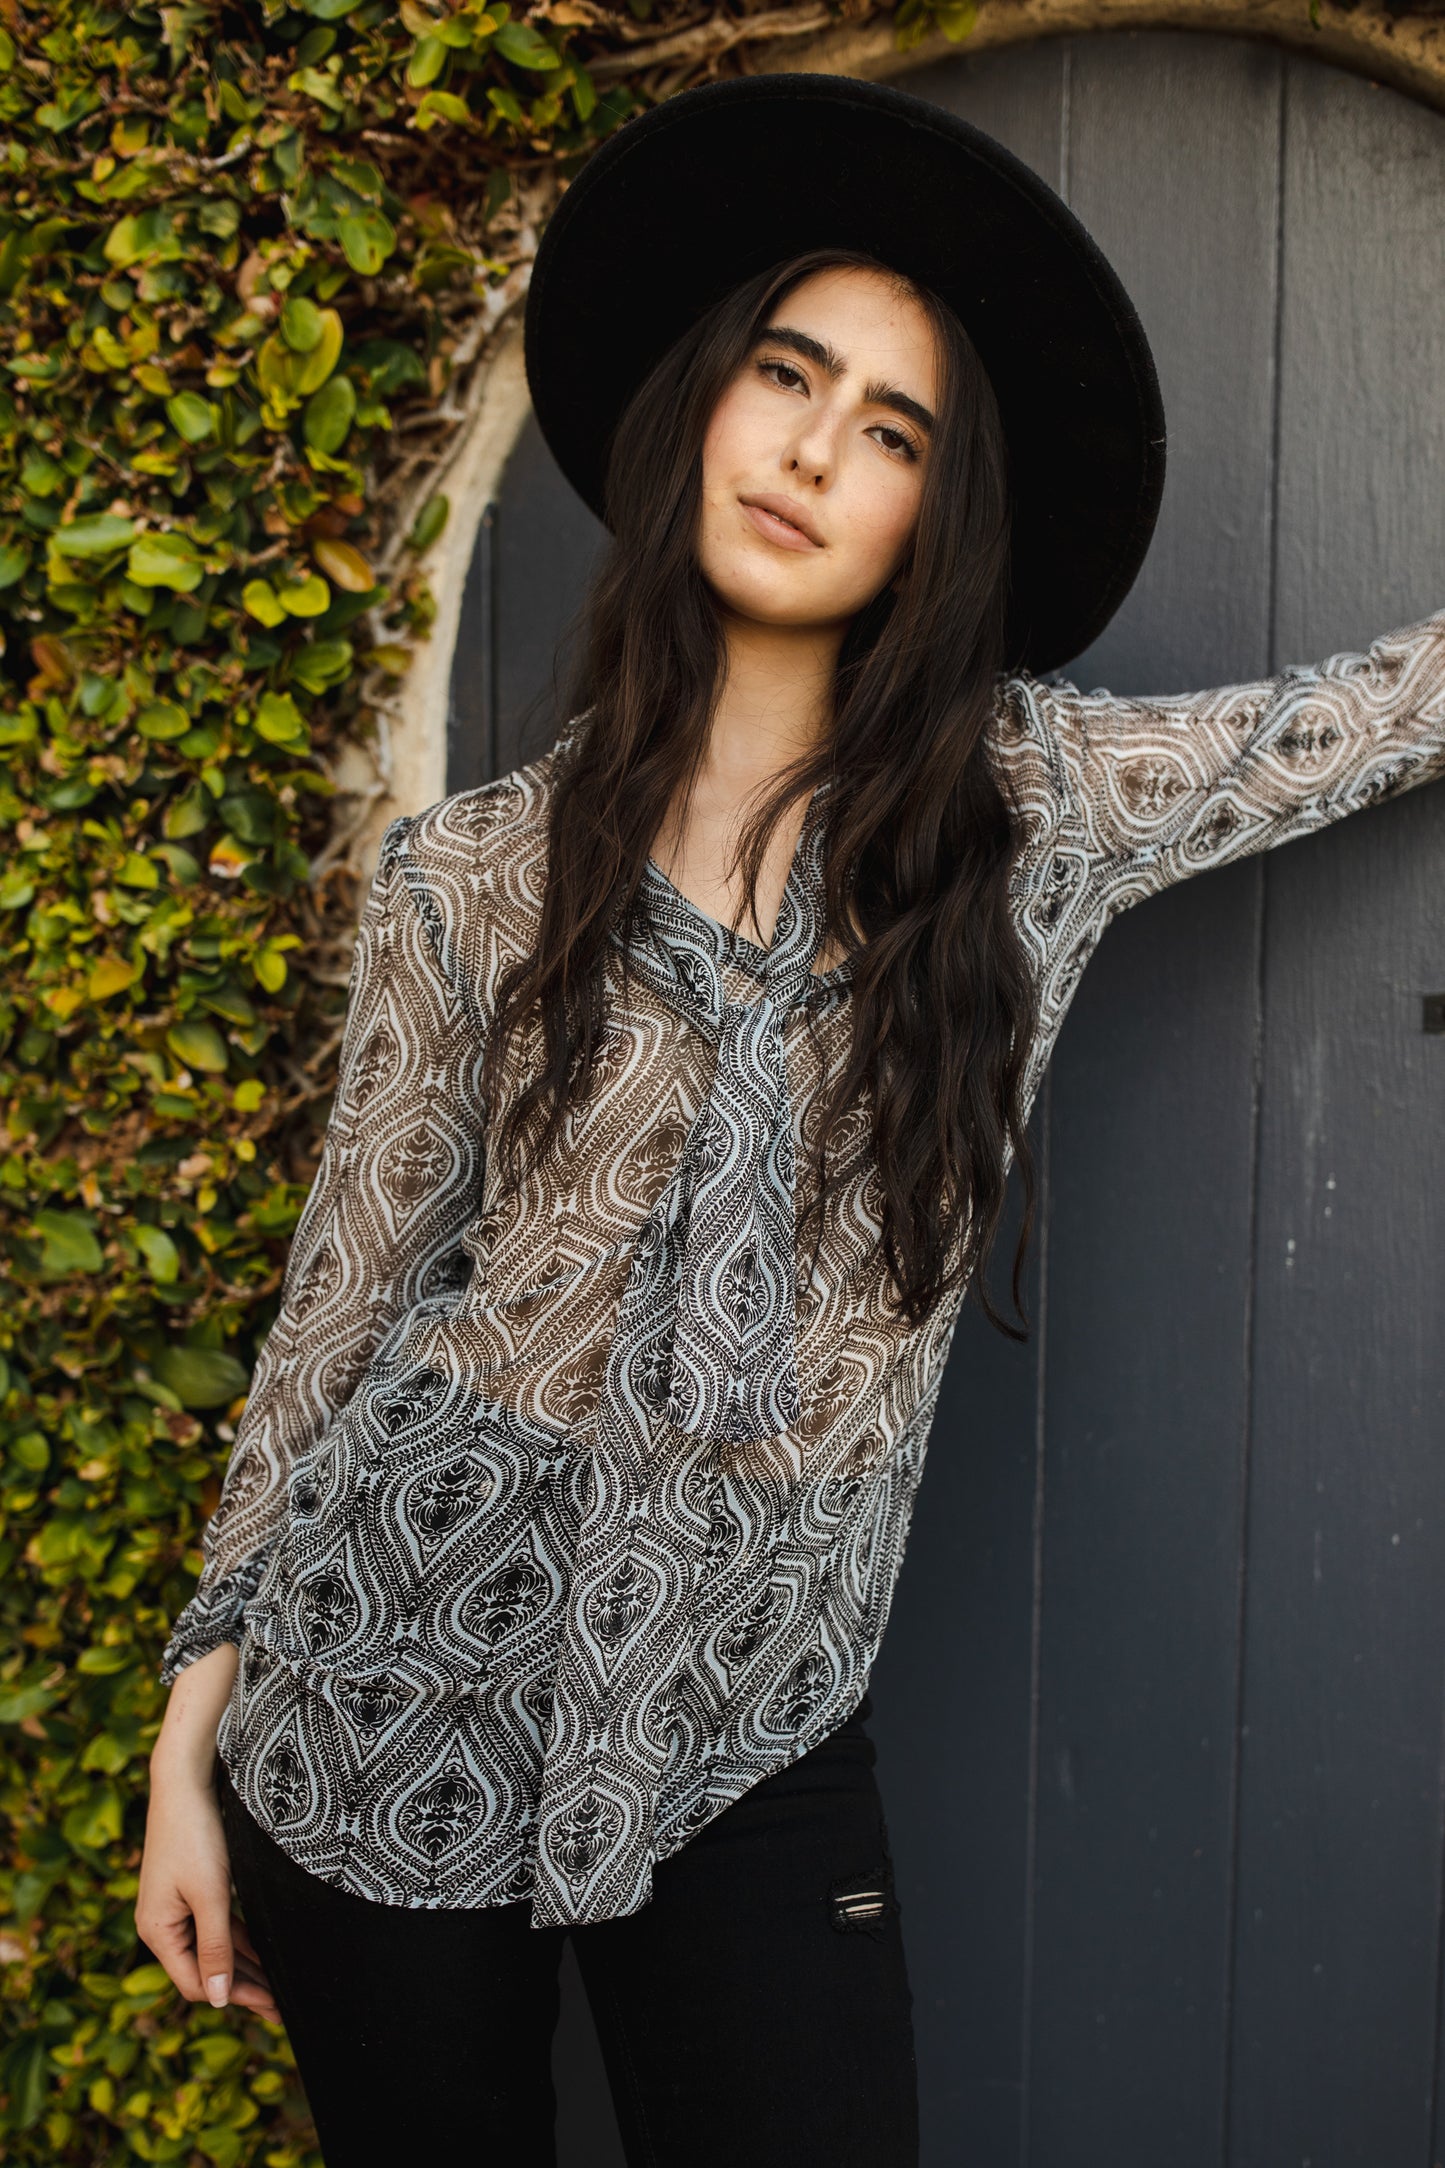 Semi-sheer, black and pale blue modern artistic paisley patterned chiffon blouse featuring long bishop sleeves, v-neck, and neck tie sash. Retro rock n' roll bohemian pussybow, bow-tie blouse.